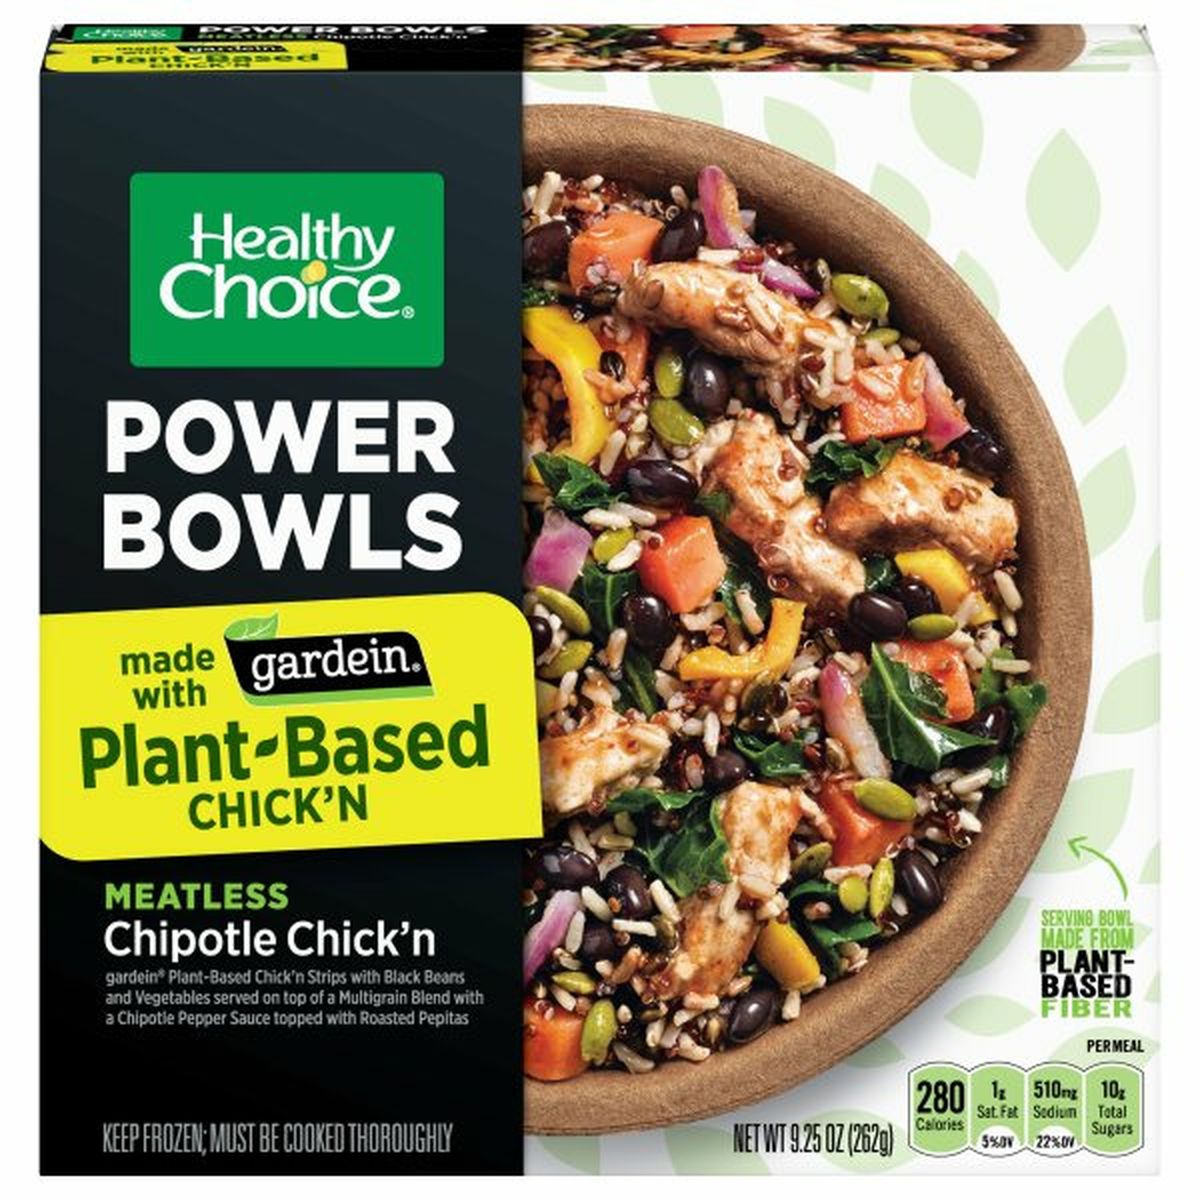 Calories in Healthy Choice Power Bowls Meatless Chipotle Chick'n